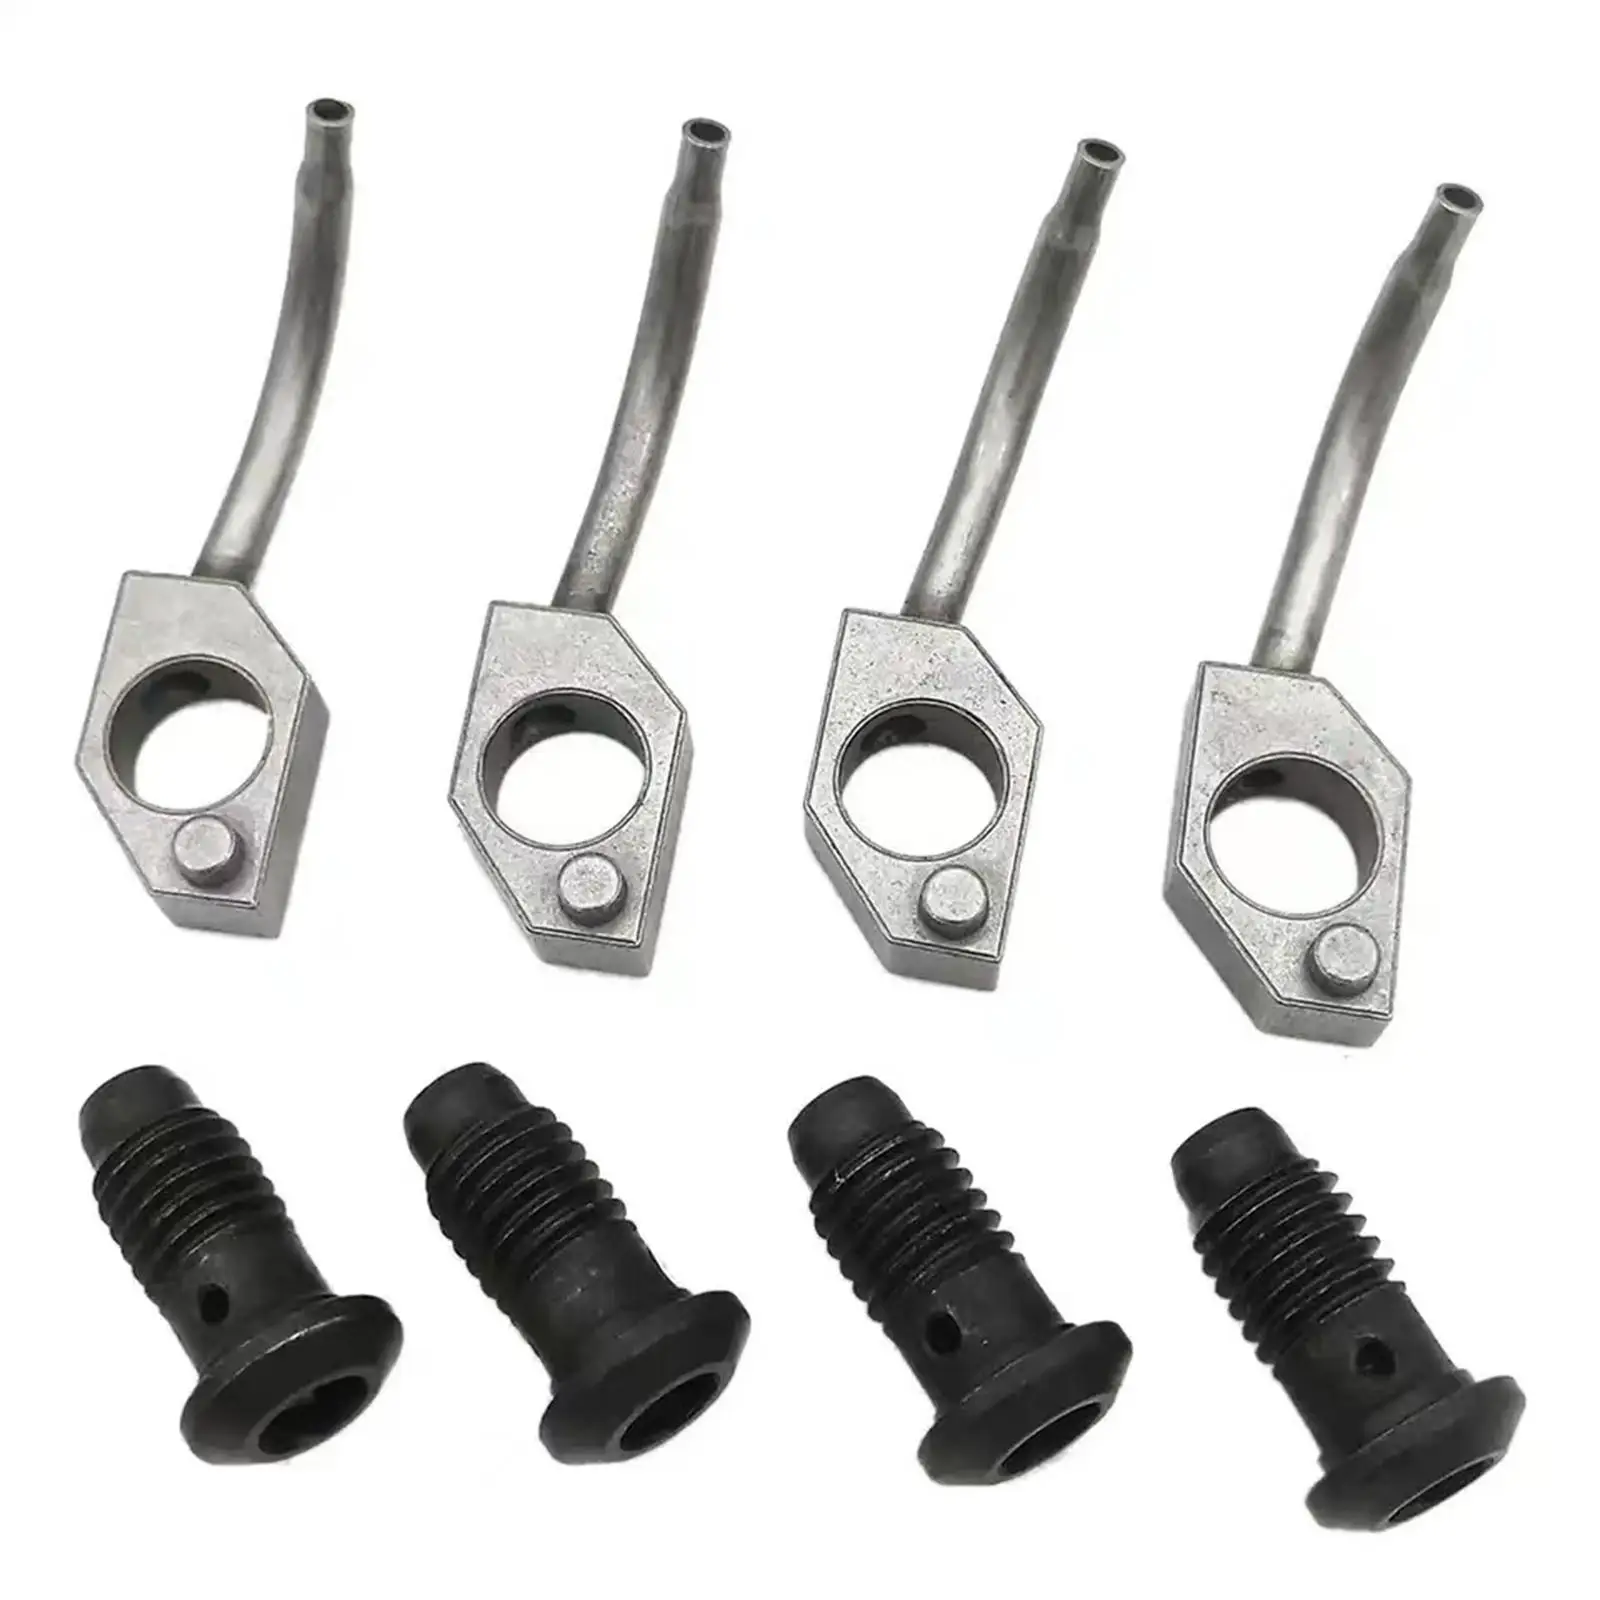 4 Pieces Engine Piston Oil Nozzle Easy to Install 55564441 for Holden